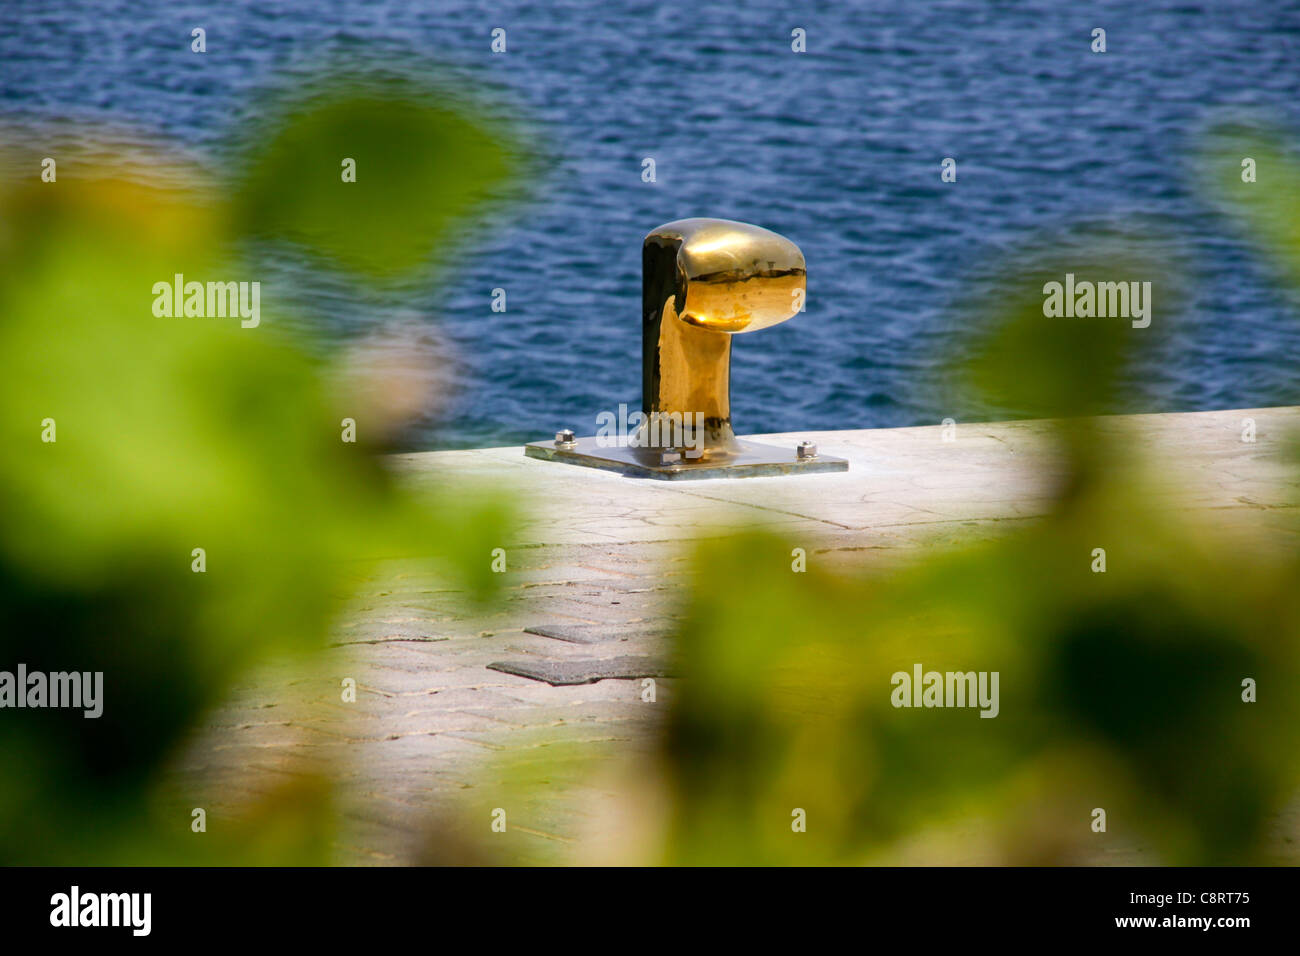 Gold coloured tie up bollard on harbourside jetty Stock Photo